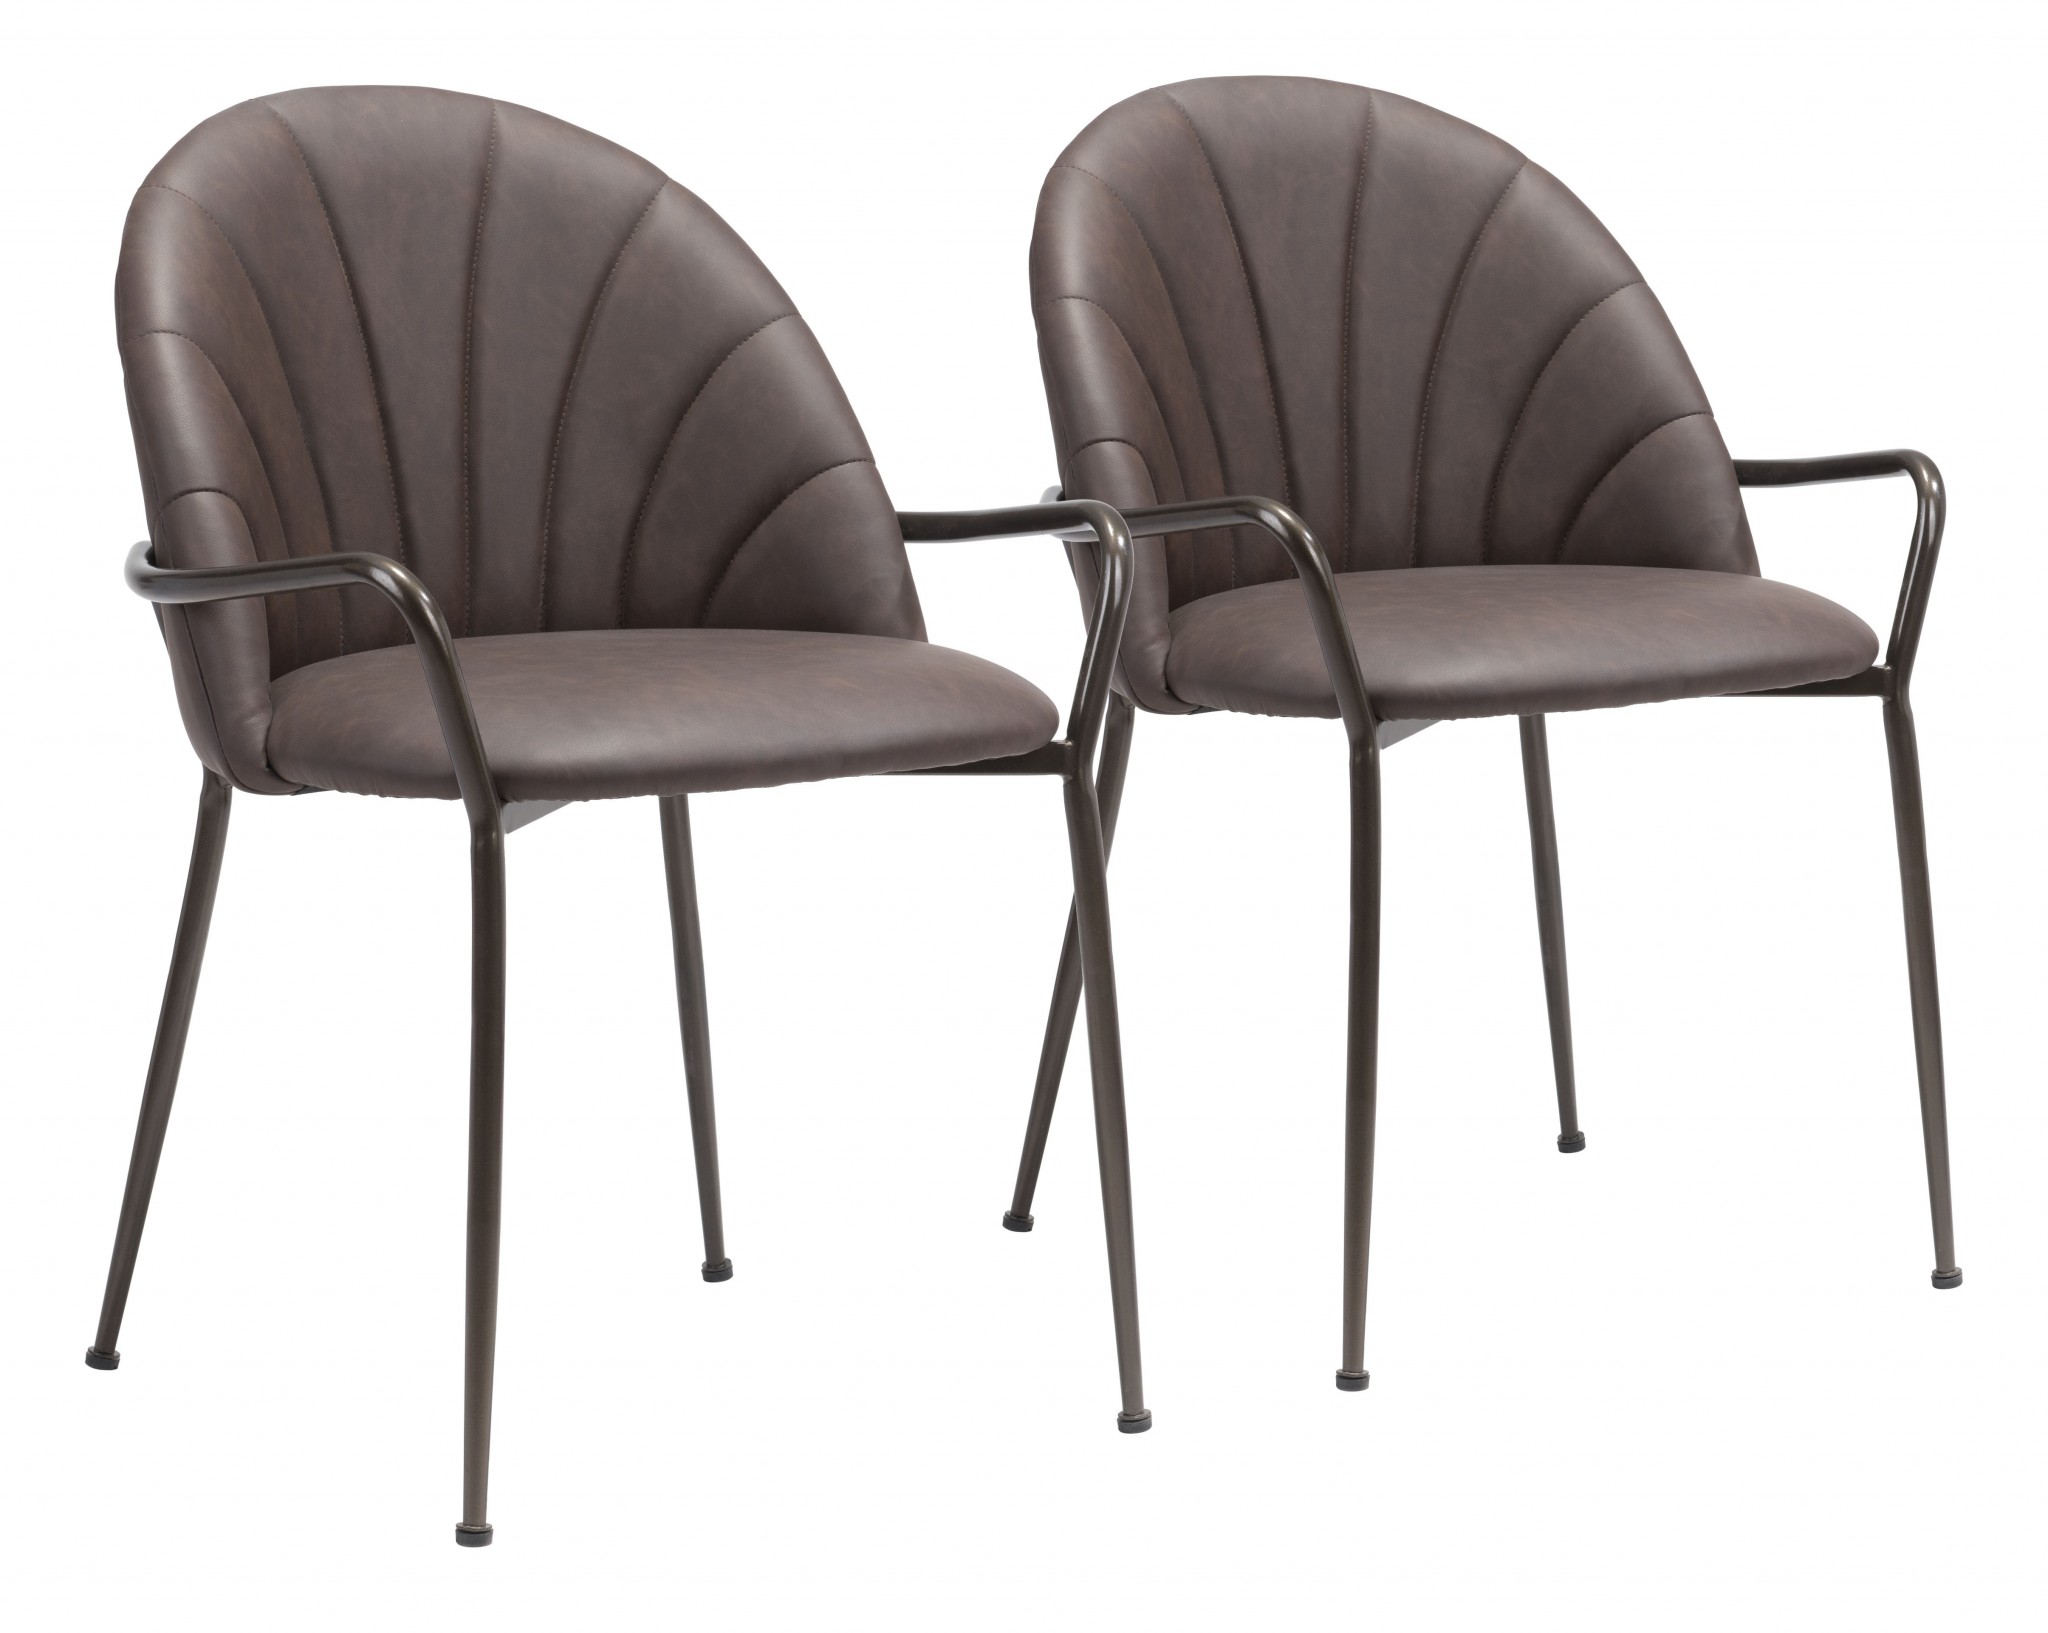 Set of Two Brown Faux Leather Arch Dining Chairs